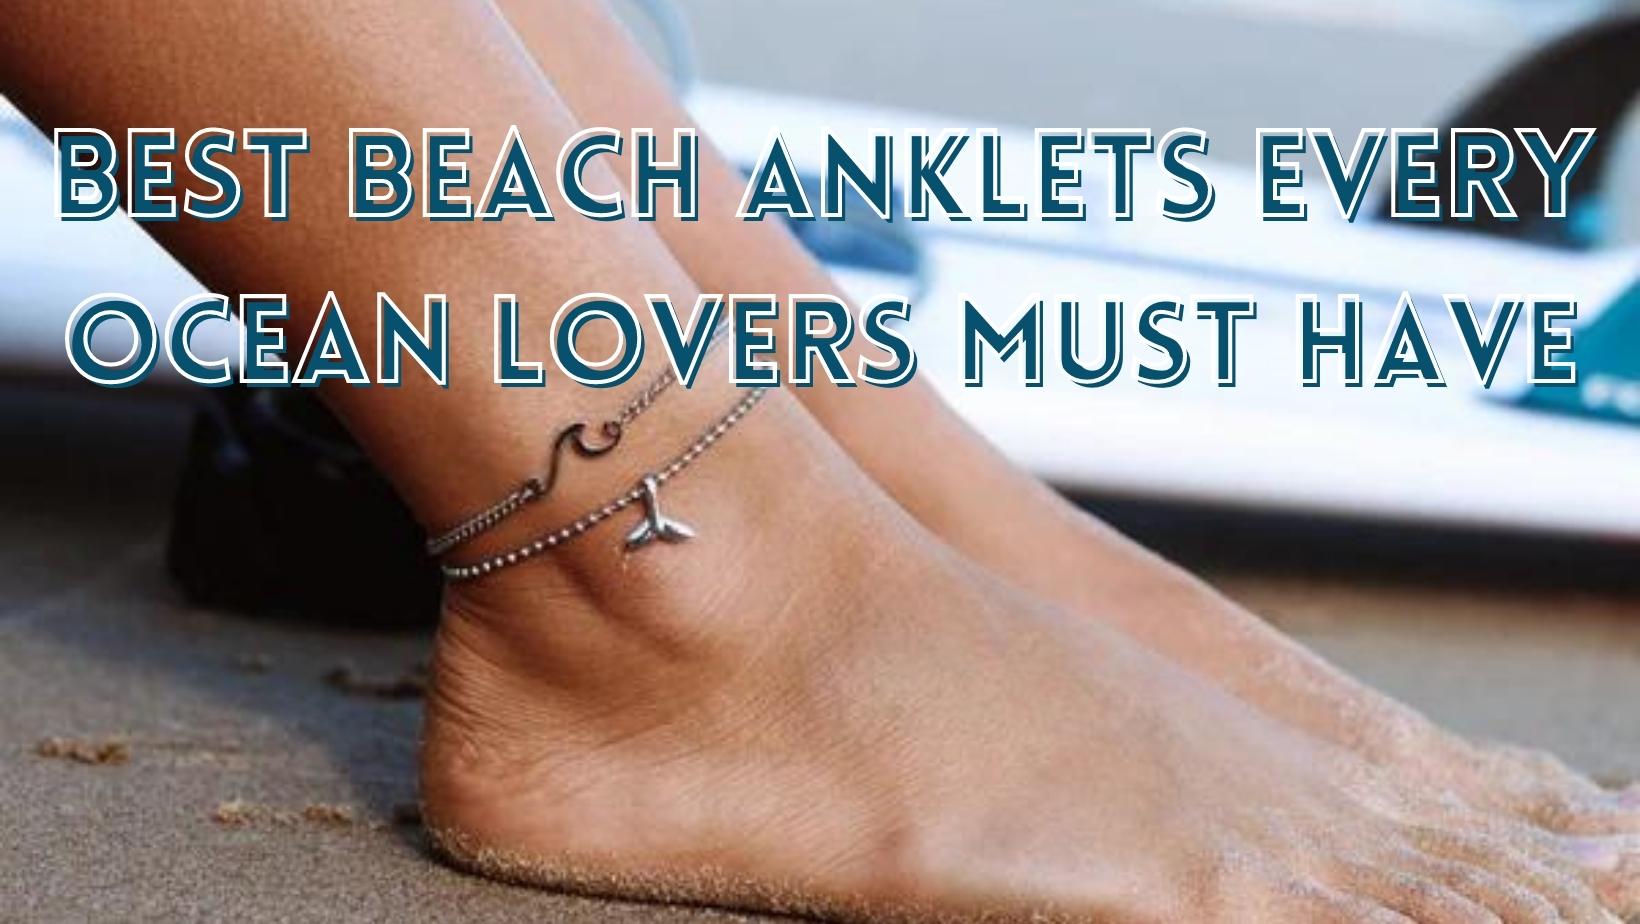 Best beach anklets every ocean lovers must have